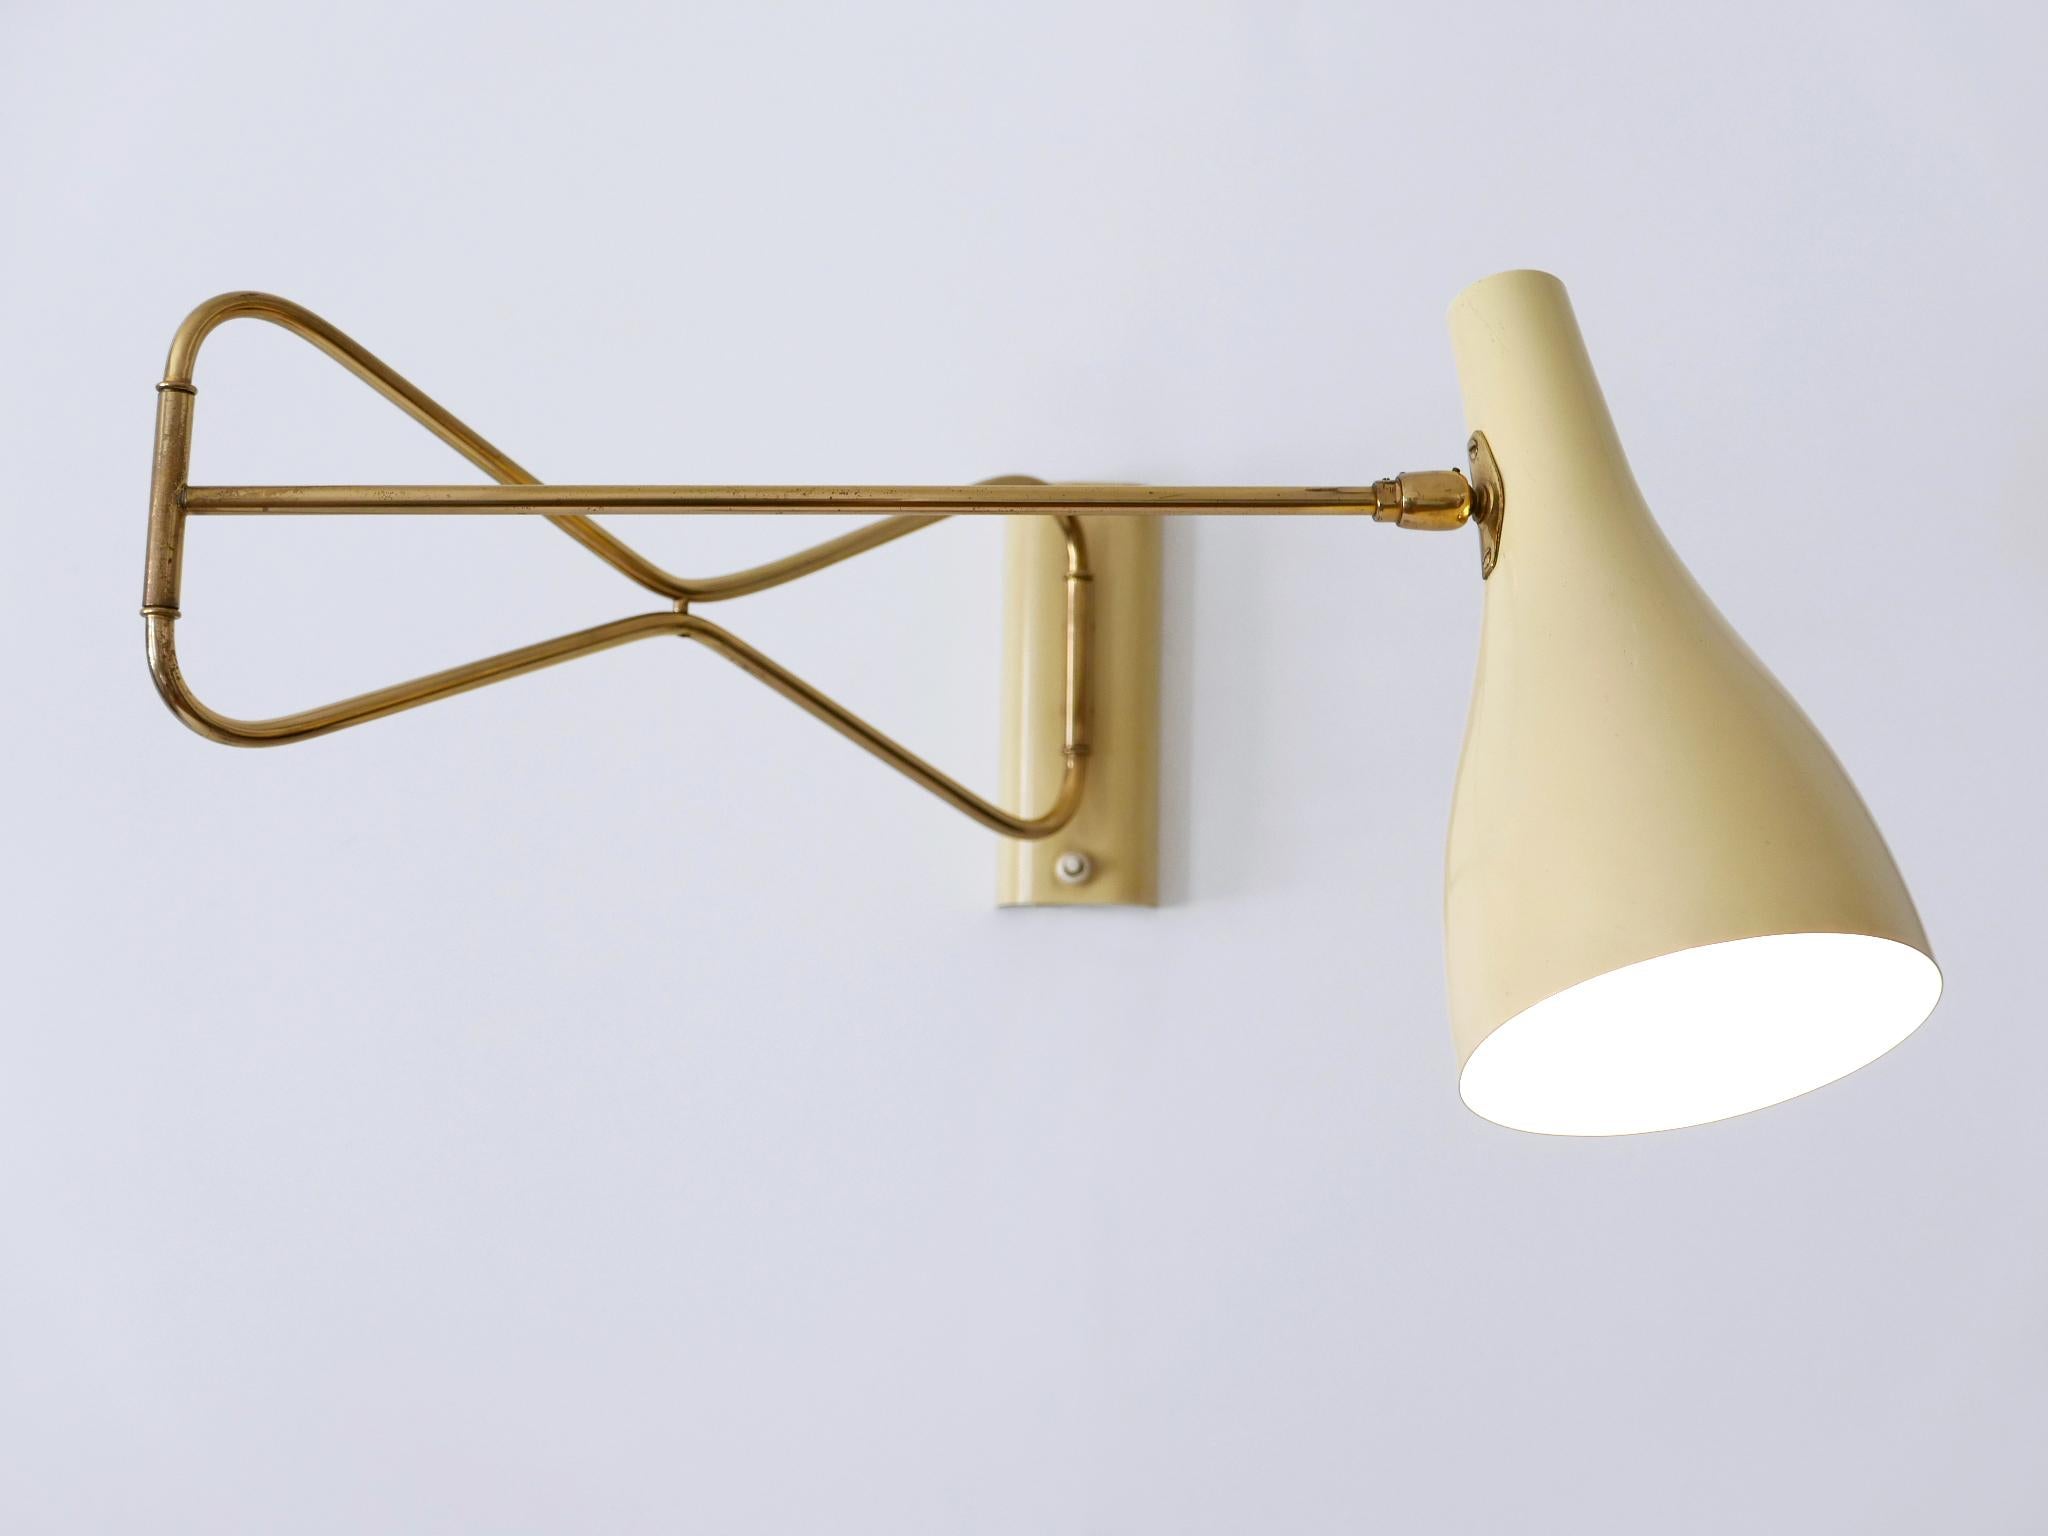 Rare & Elegant Mid Century Modern Wall Lamp '9590/28' by Cosack Germany 1950s For Sale 3